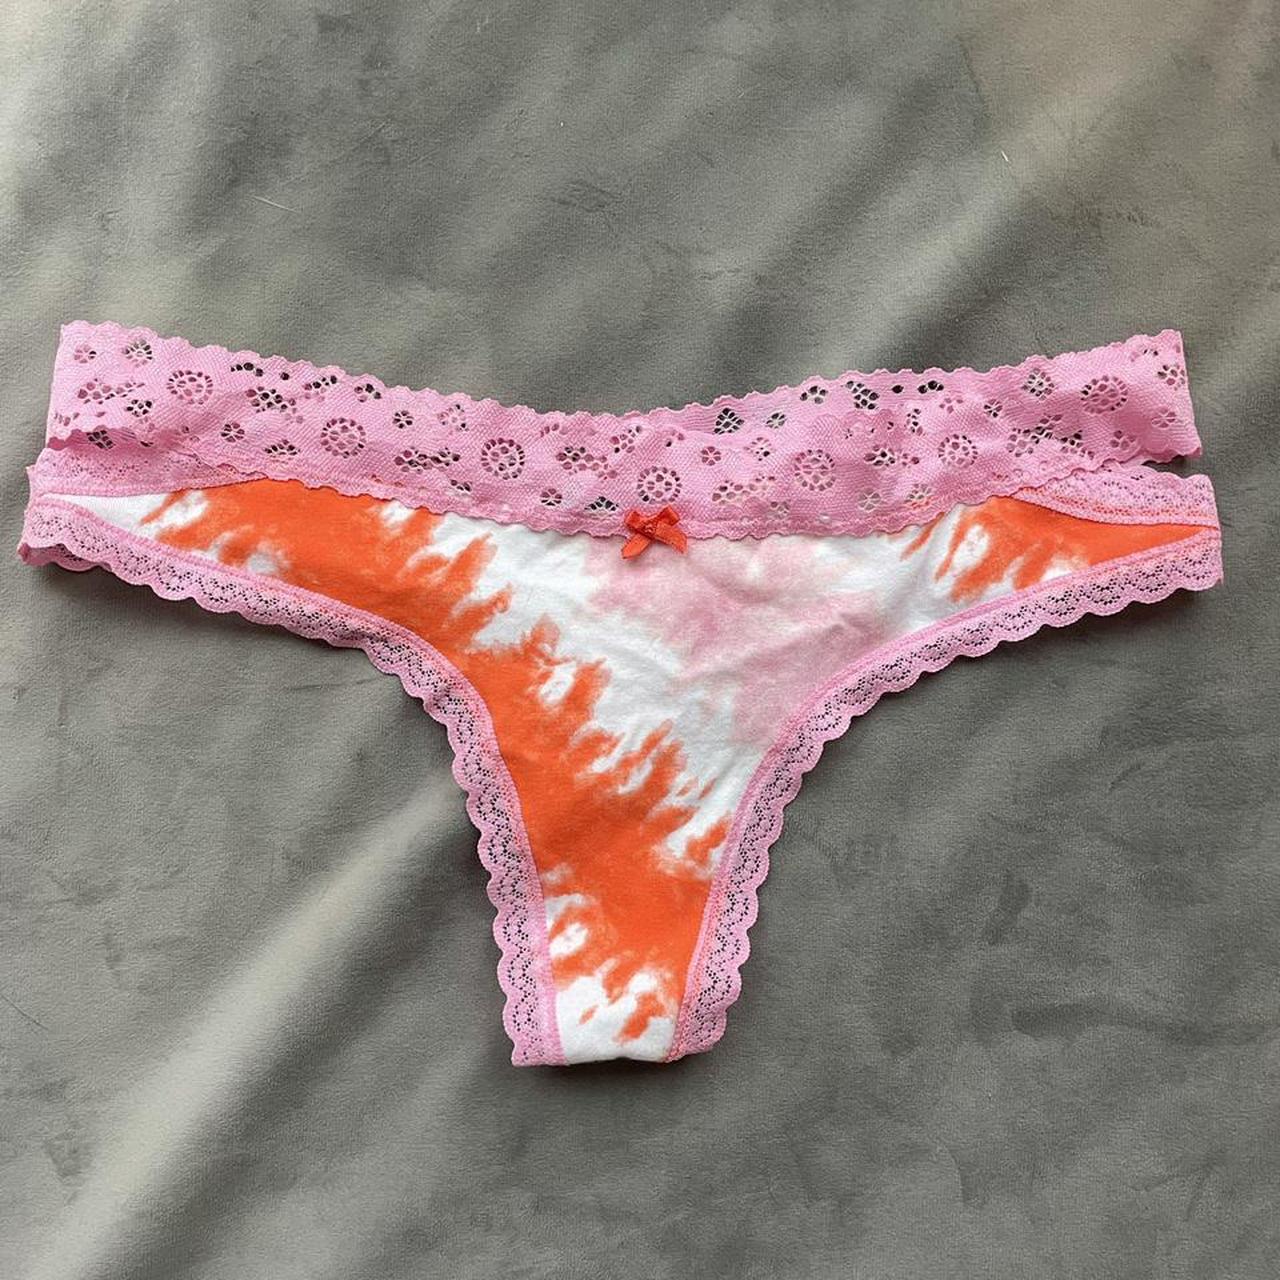 aerie thong size small - Depop